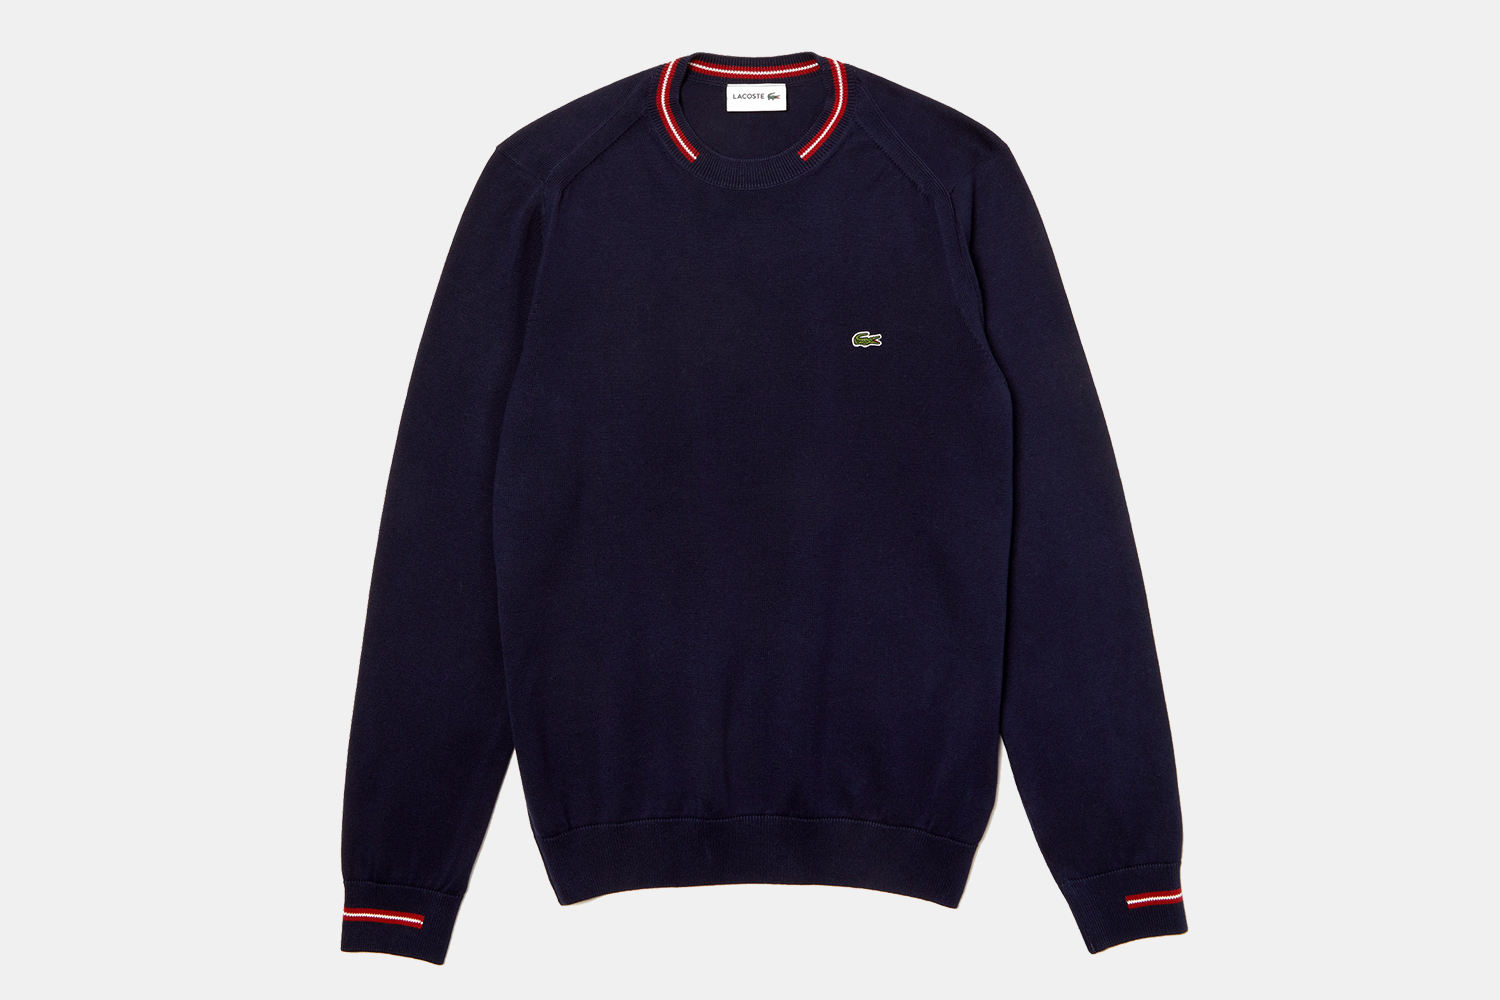 Lacoste Men's Mixed Stitch and Striped Crewneck Sweater